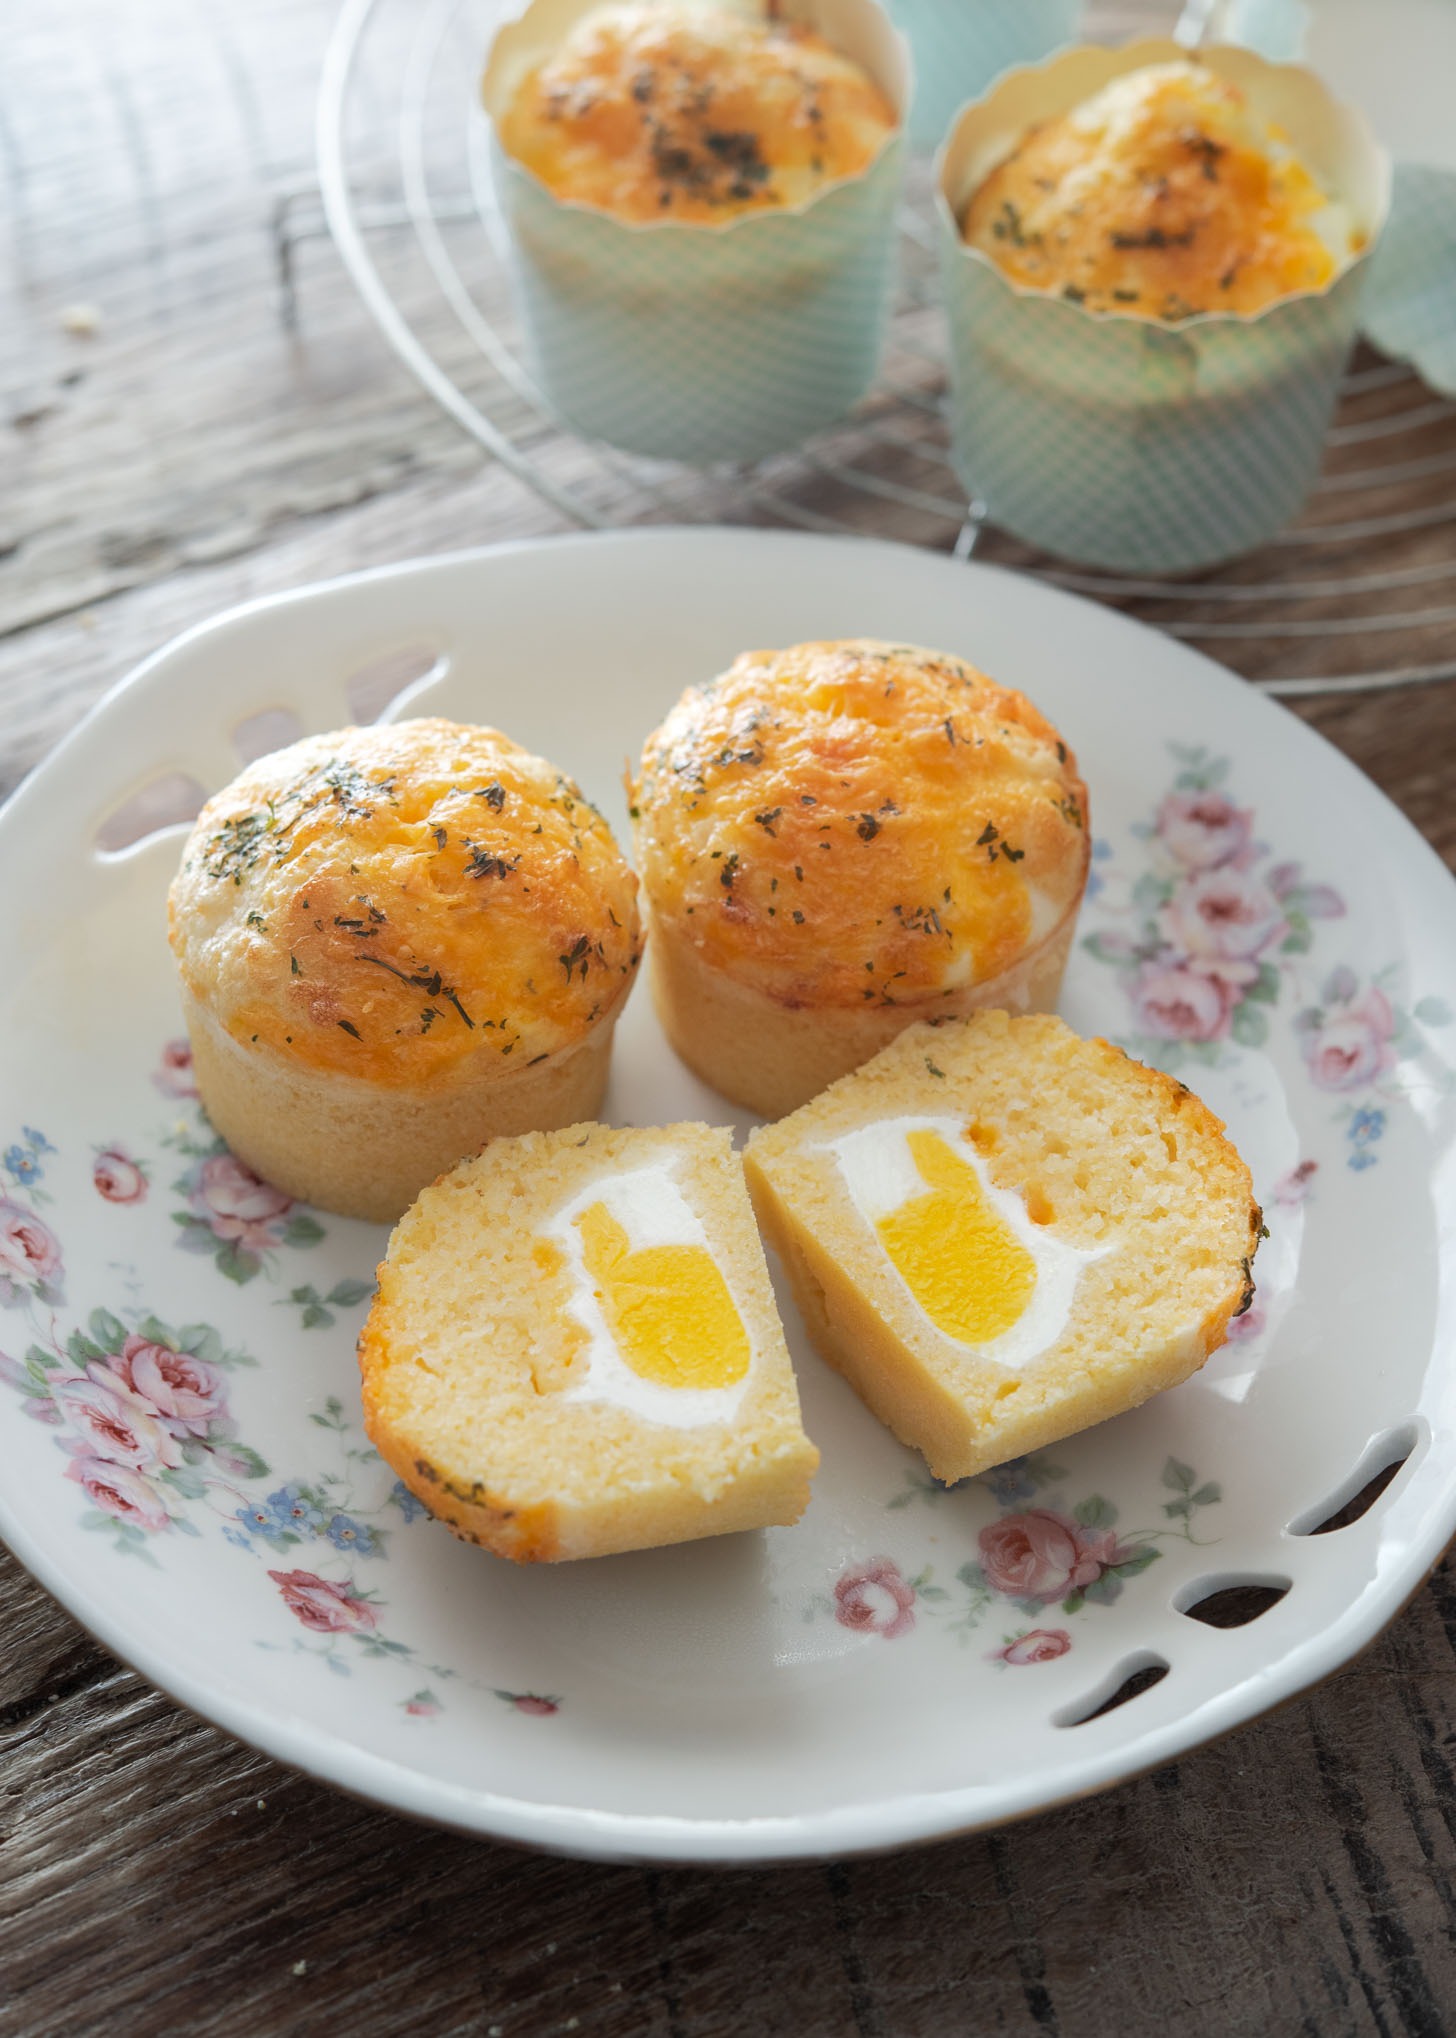 Korean egg bread muffins showing the whole egg bread inside.